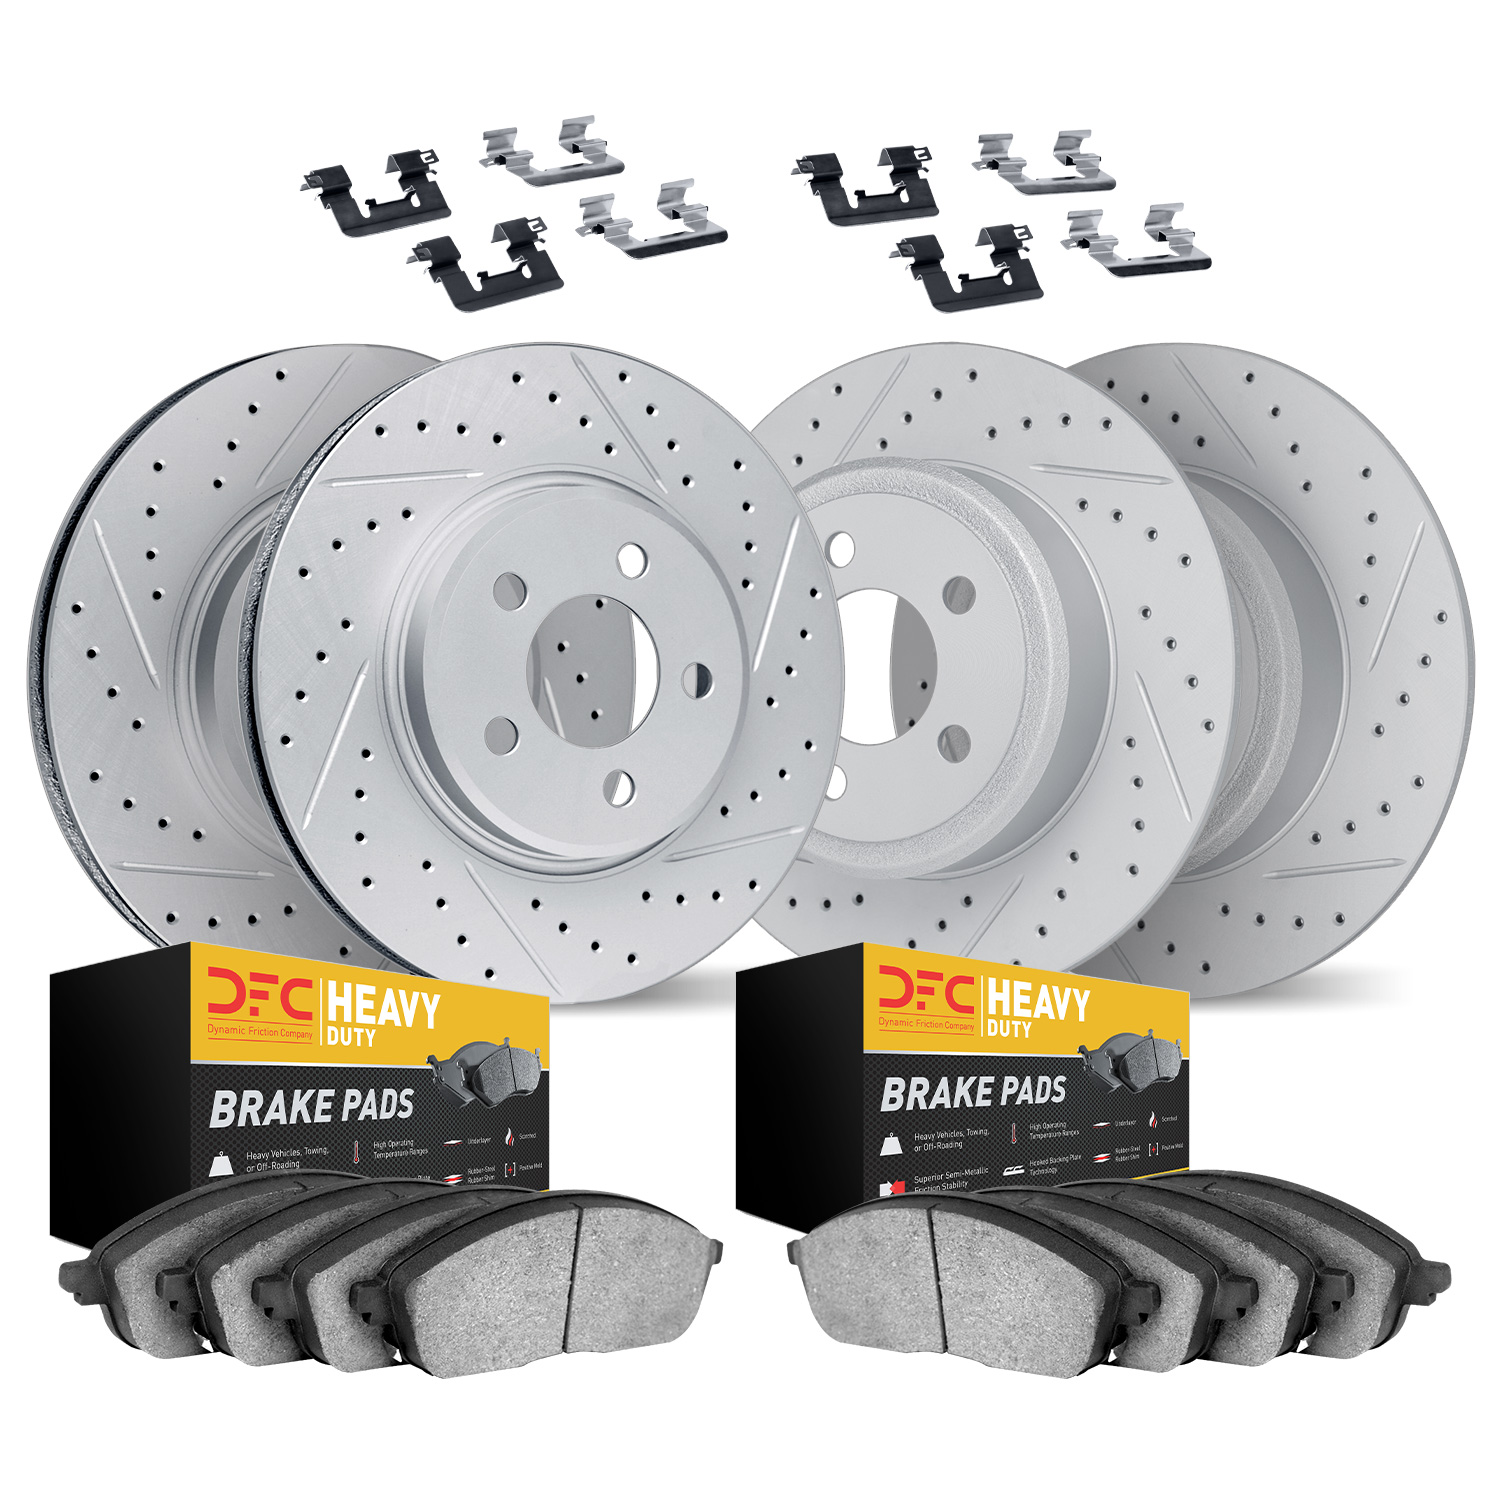 2214-99042 Geoperformance Drilled/Slotted Rotors w/Heavy-Duty Pads Kit & Hardware, 2001-2002 Ford/Lincoln/Mercury/Mazda, Positio